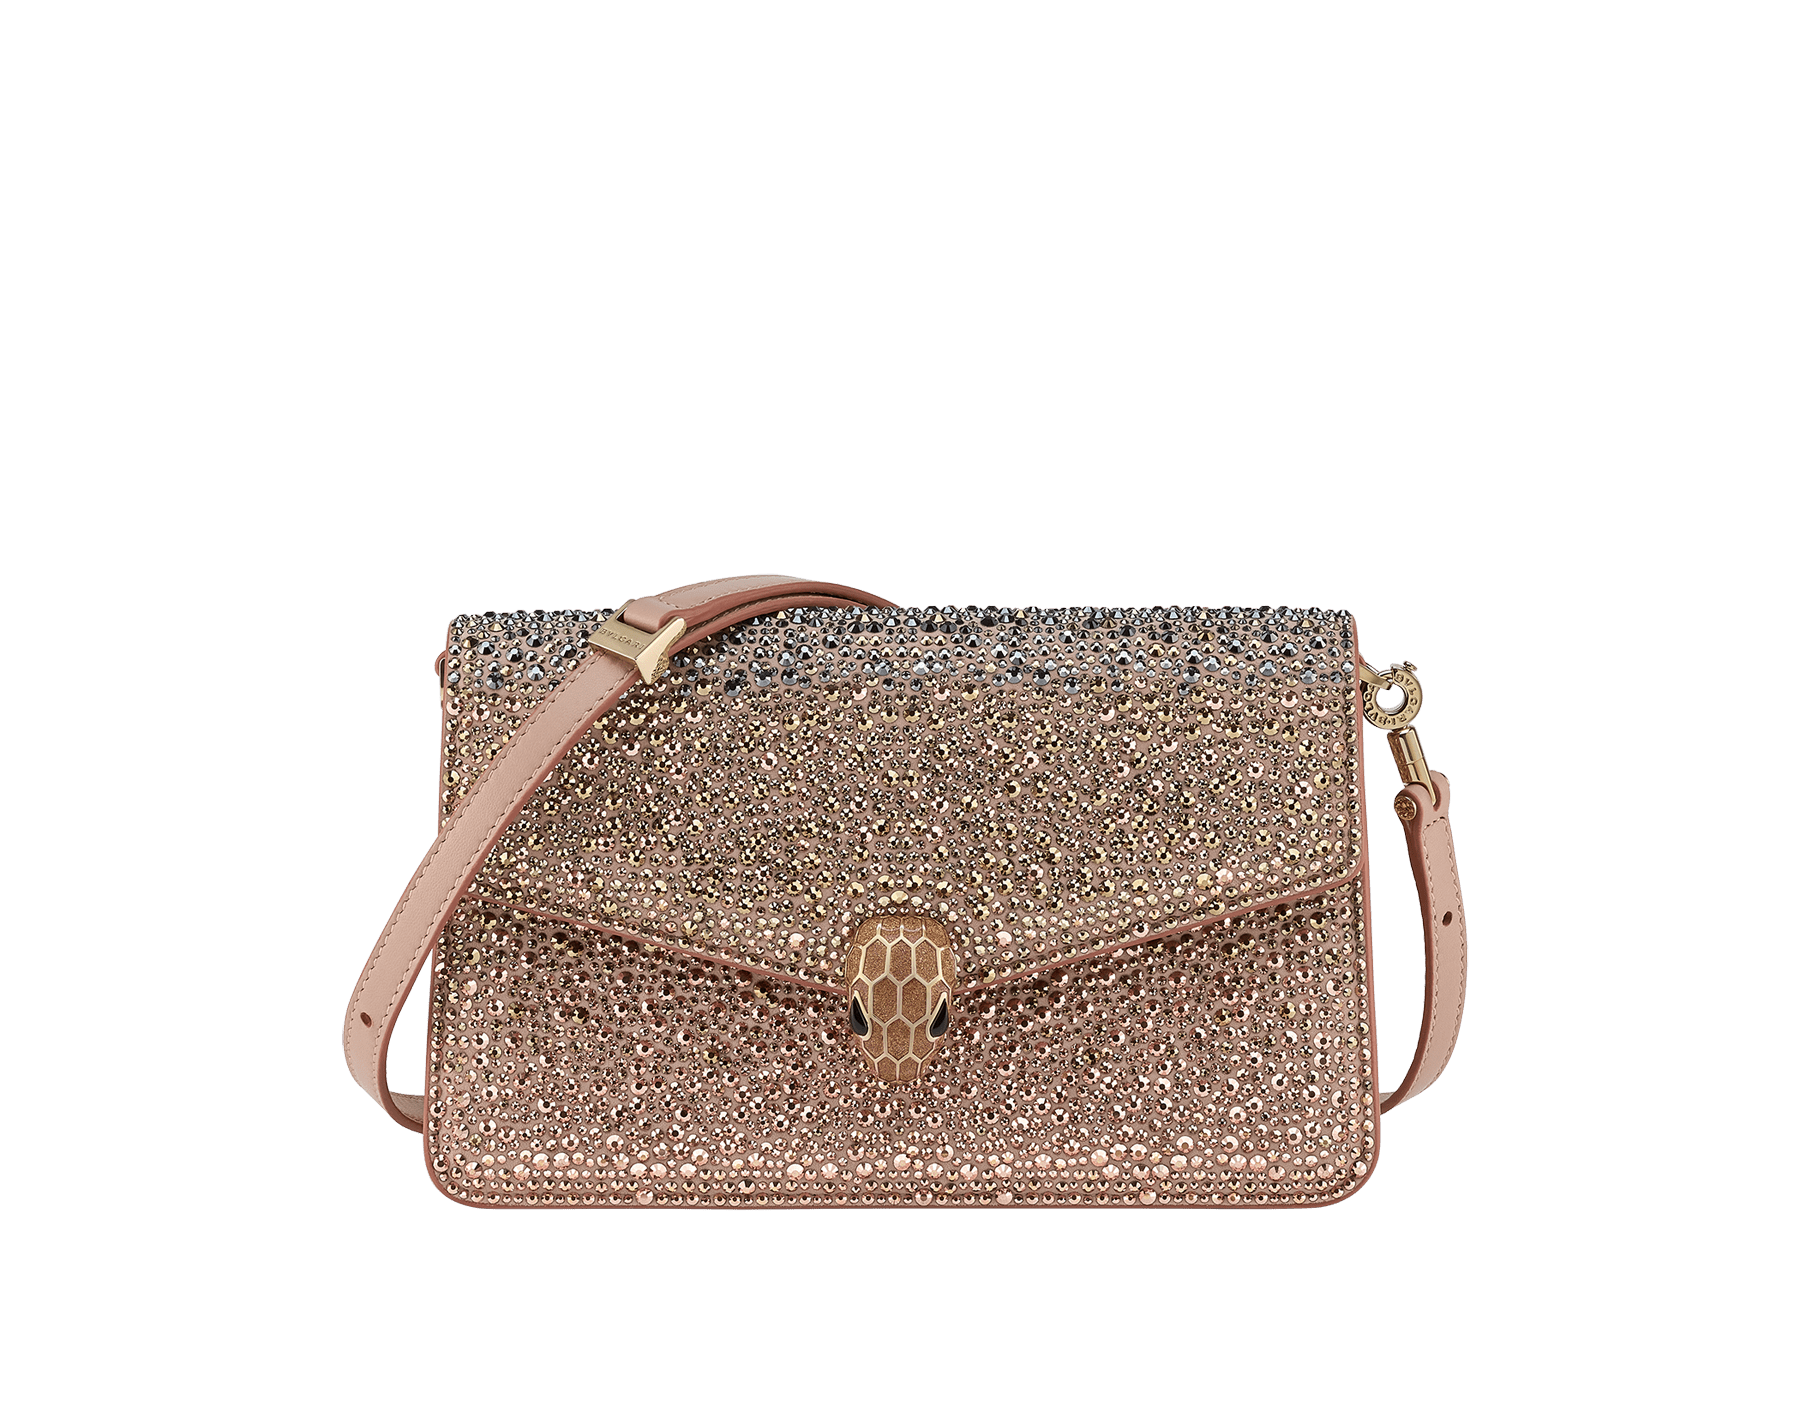 Serpenti Forever East-West small shoulder bag in desert rose suede with multi-sized dégradé rose gold crystals and desert quartz pink nappa leather lining. Captivating snakehead magnetic closure in light gold-plated brass embellished with "diamantatura" engraving on the scales, and black onyx eyes. Chinese New Year Special Edition. 293035 image 1